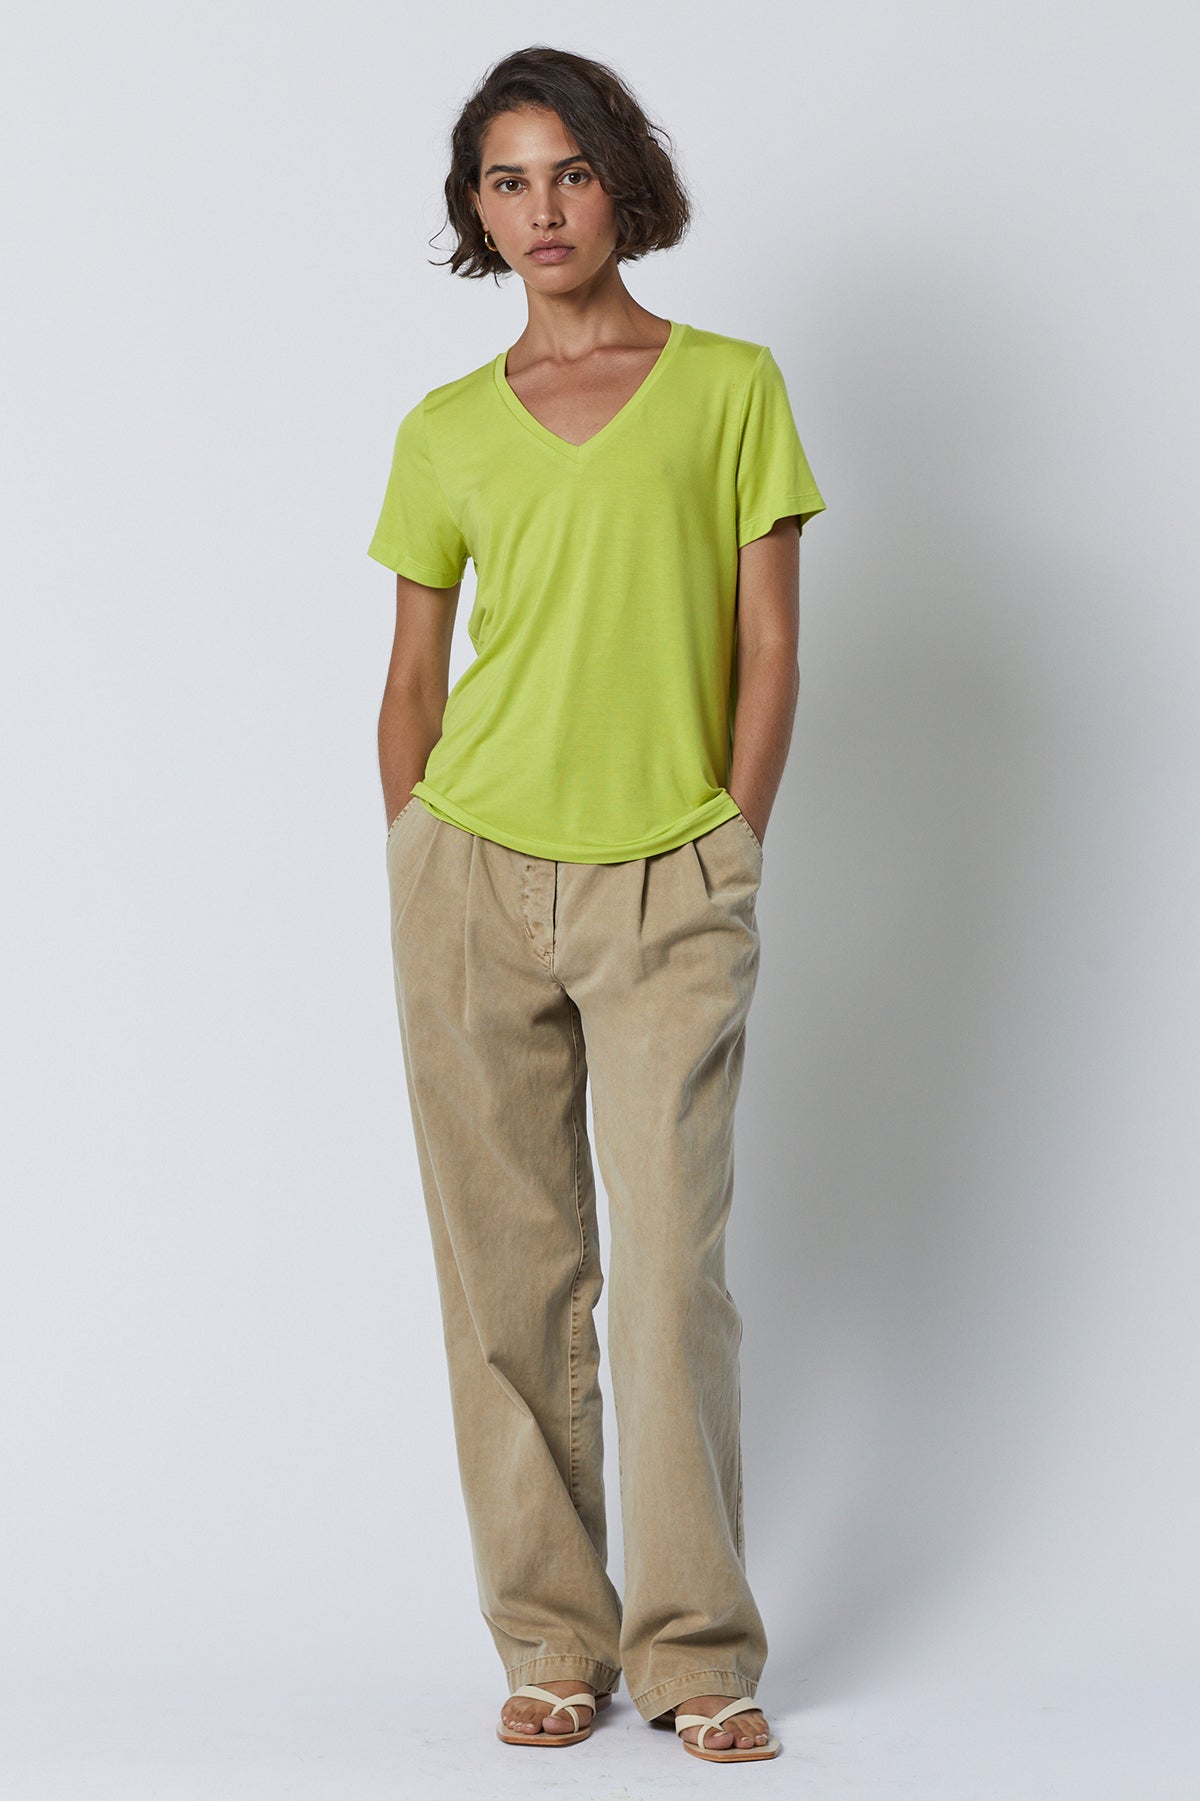   Temescal Pant in putty with Runyon tee in lime full length front 